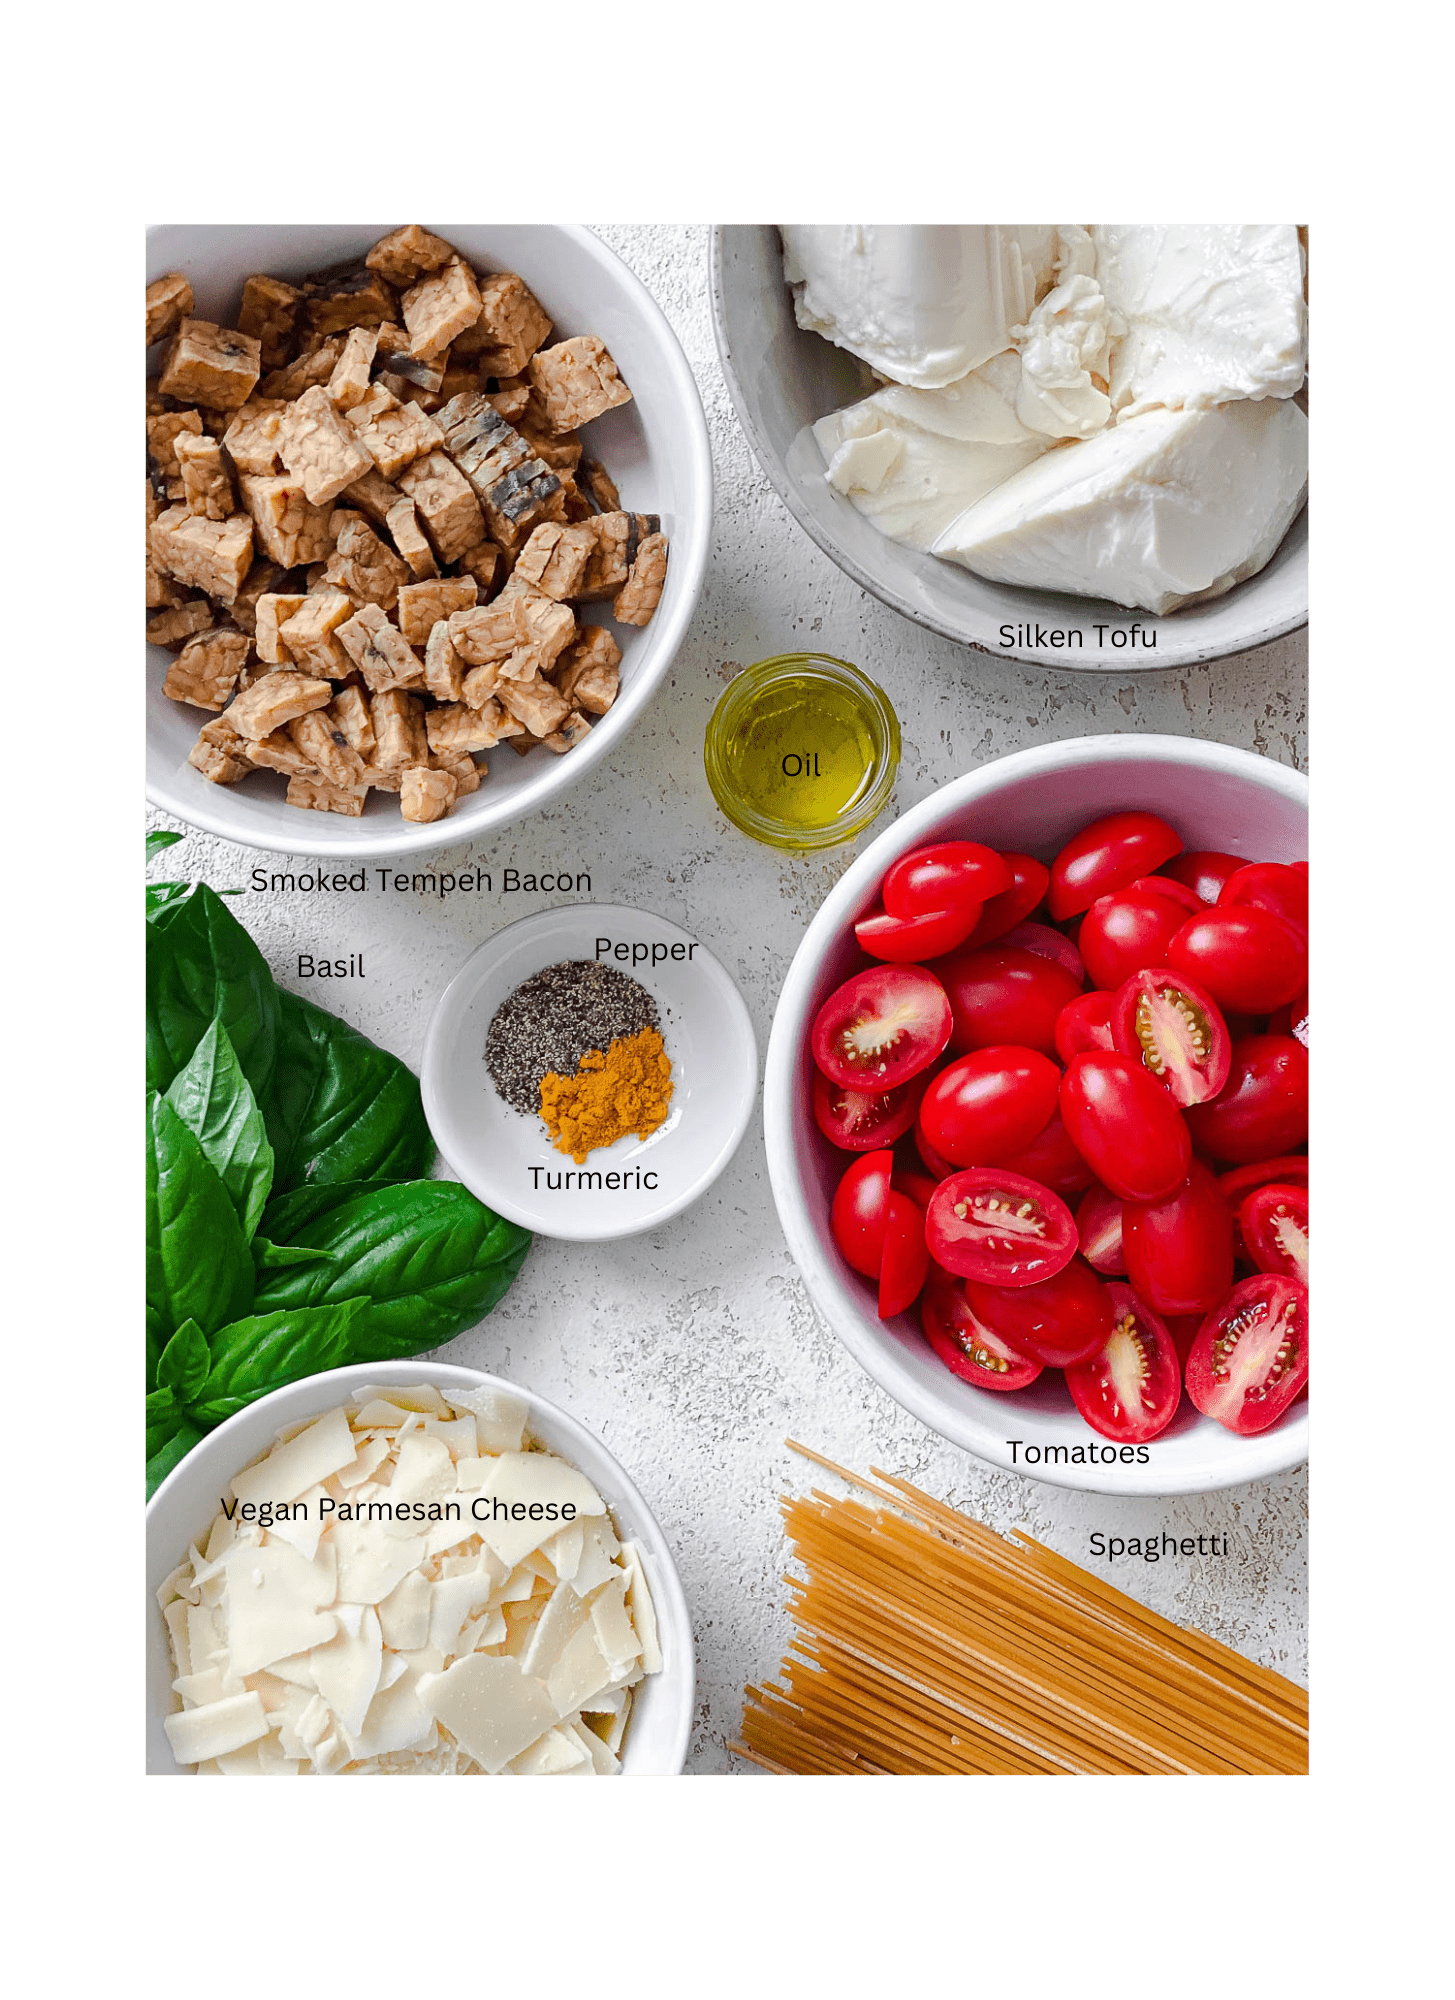 ingredients for Easy Vegan Carbonara measure out against a white surface